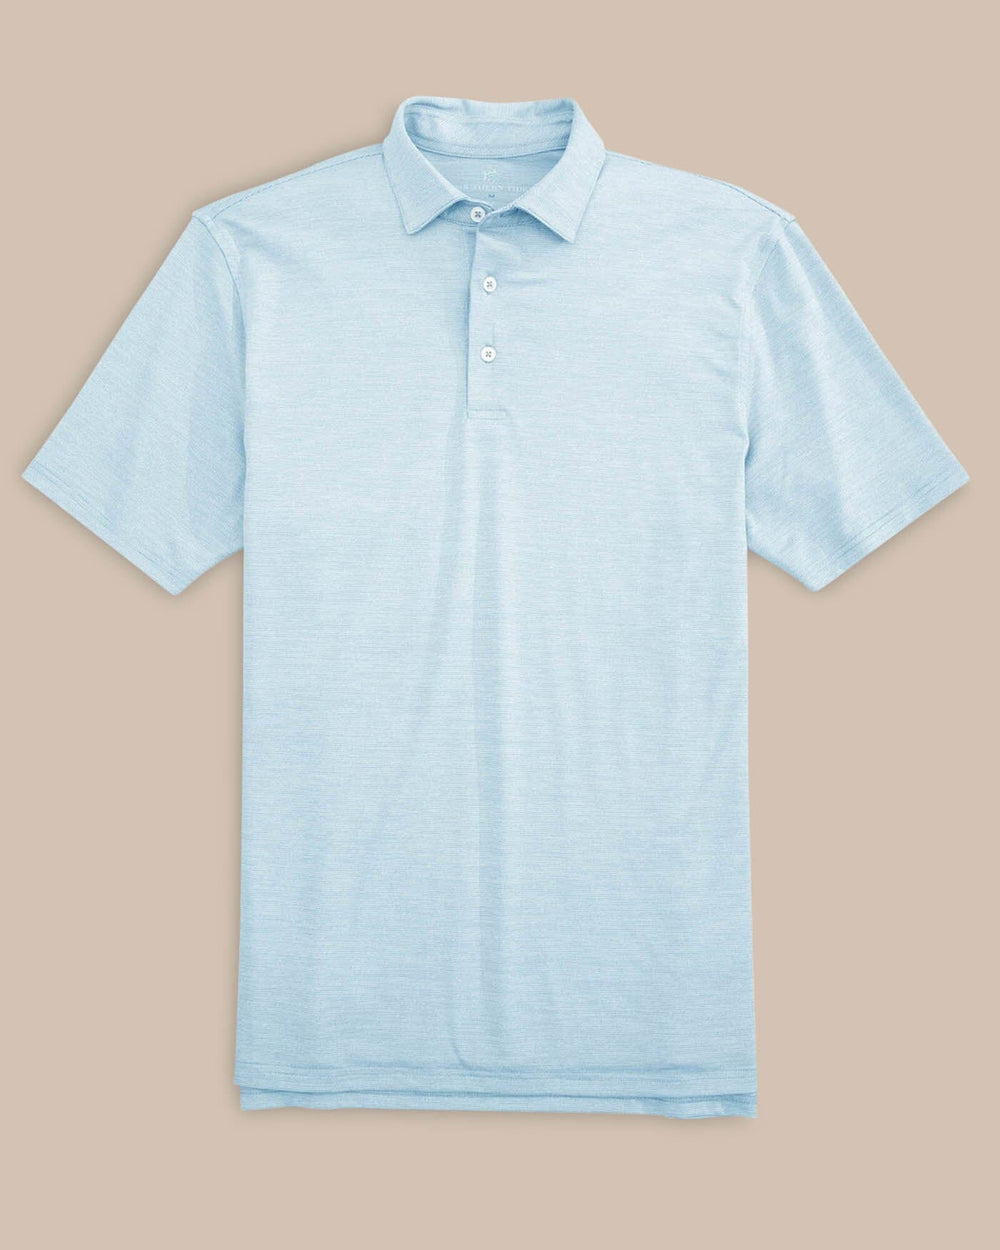 The front view of the Team Colors Driver Spacedye Polo Shirt by Southern Tide - Rush Blue